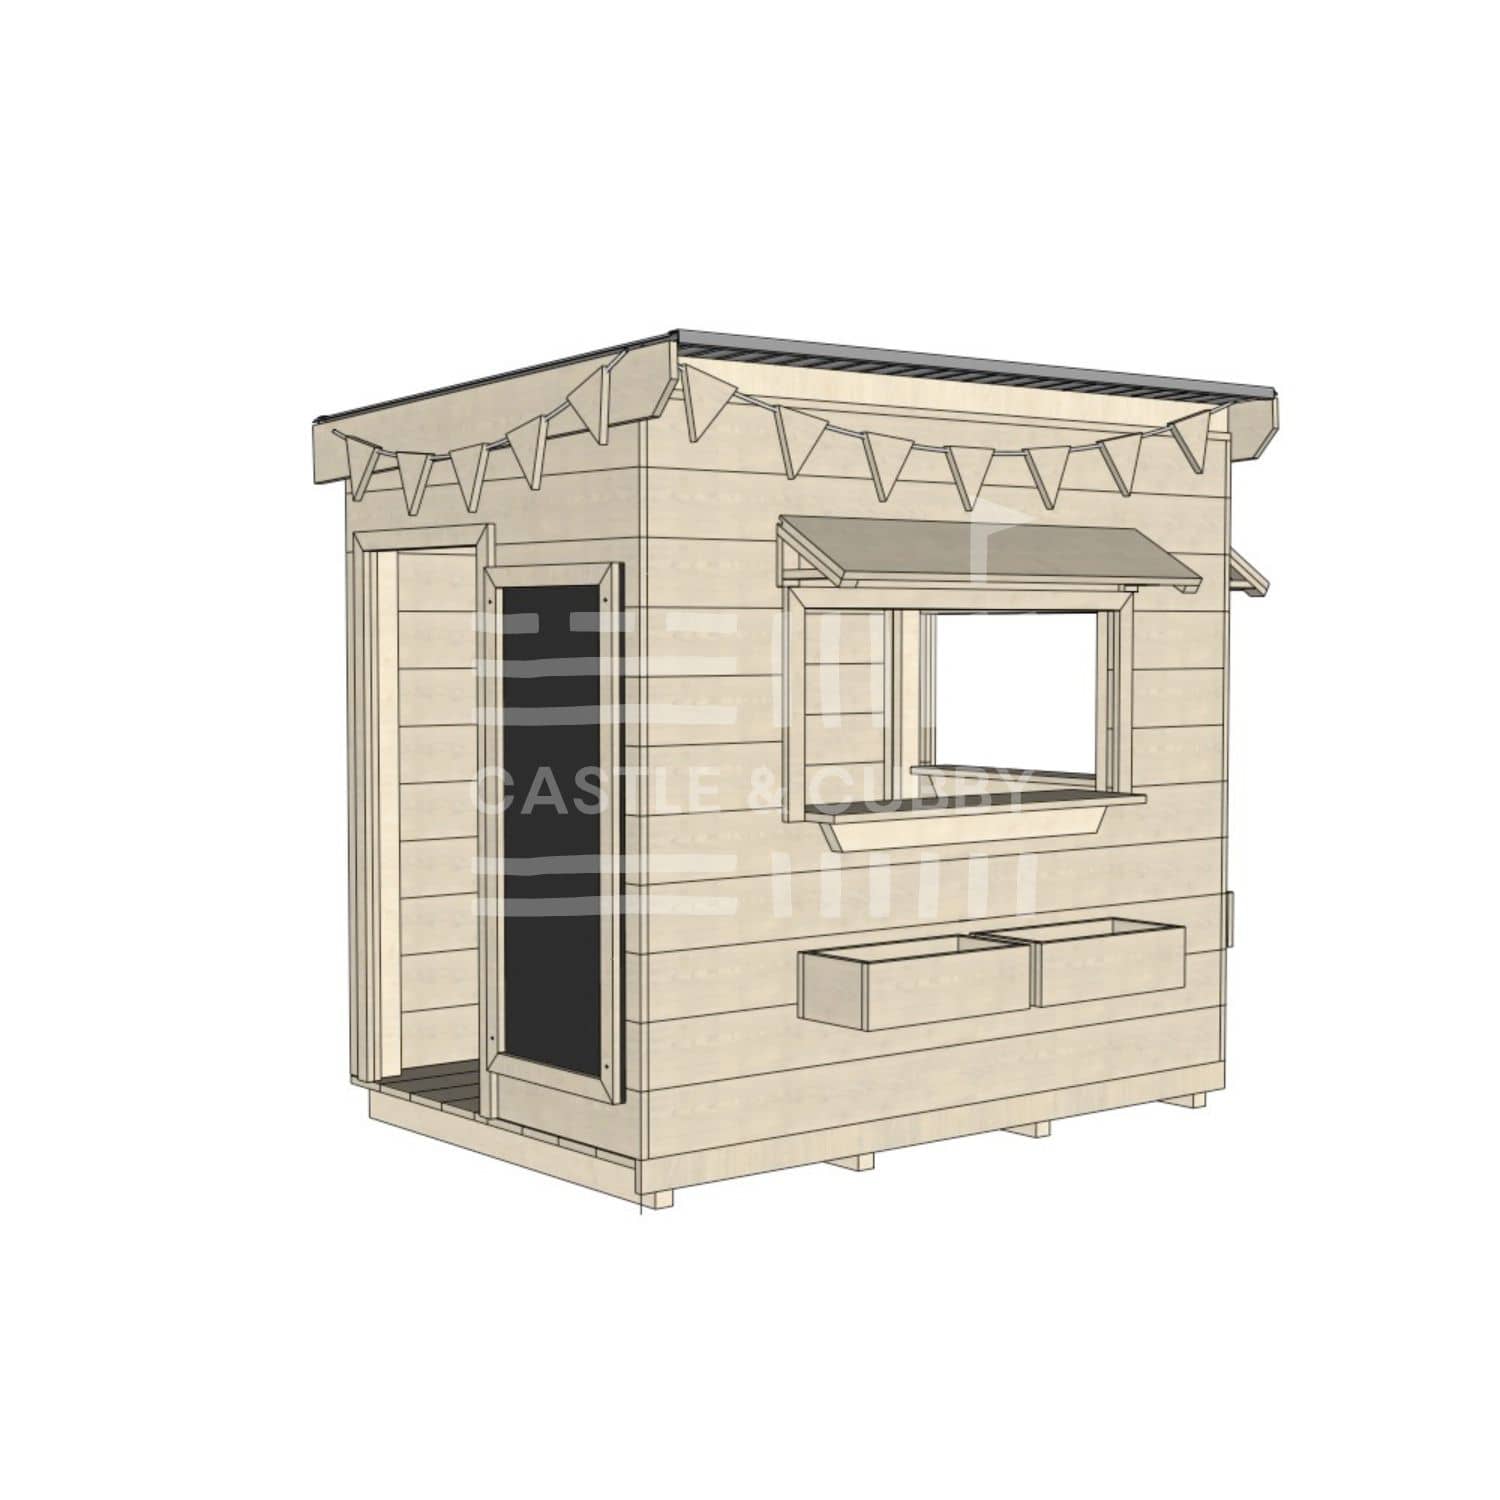 Flat roof raw wooden cubby house commercial education little rectangle accessories